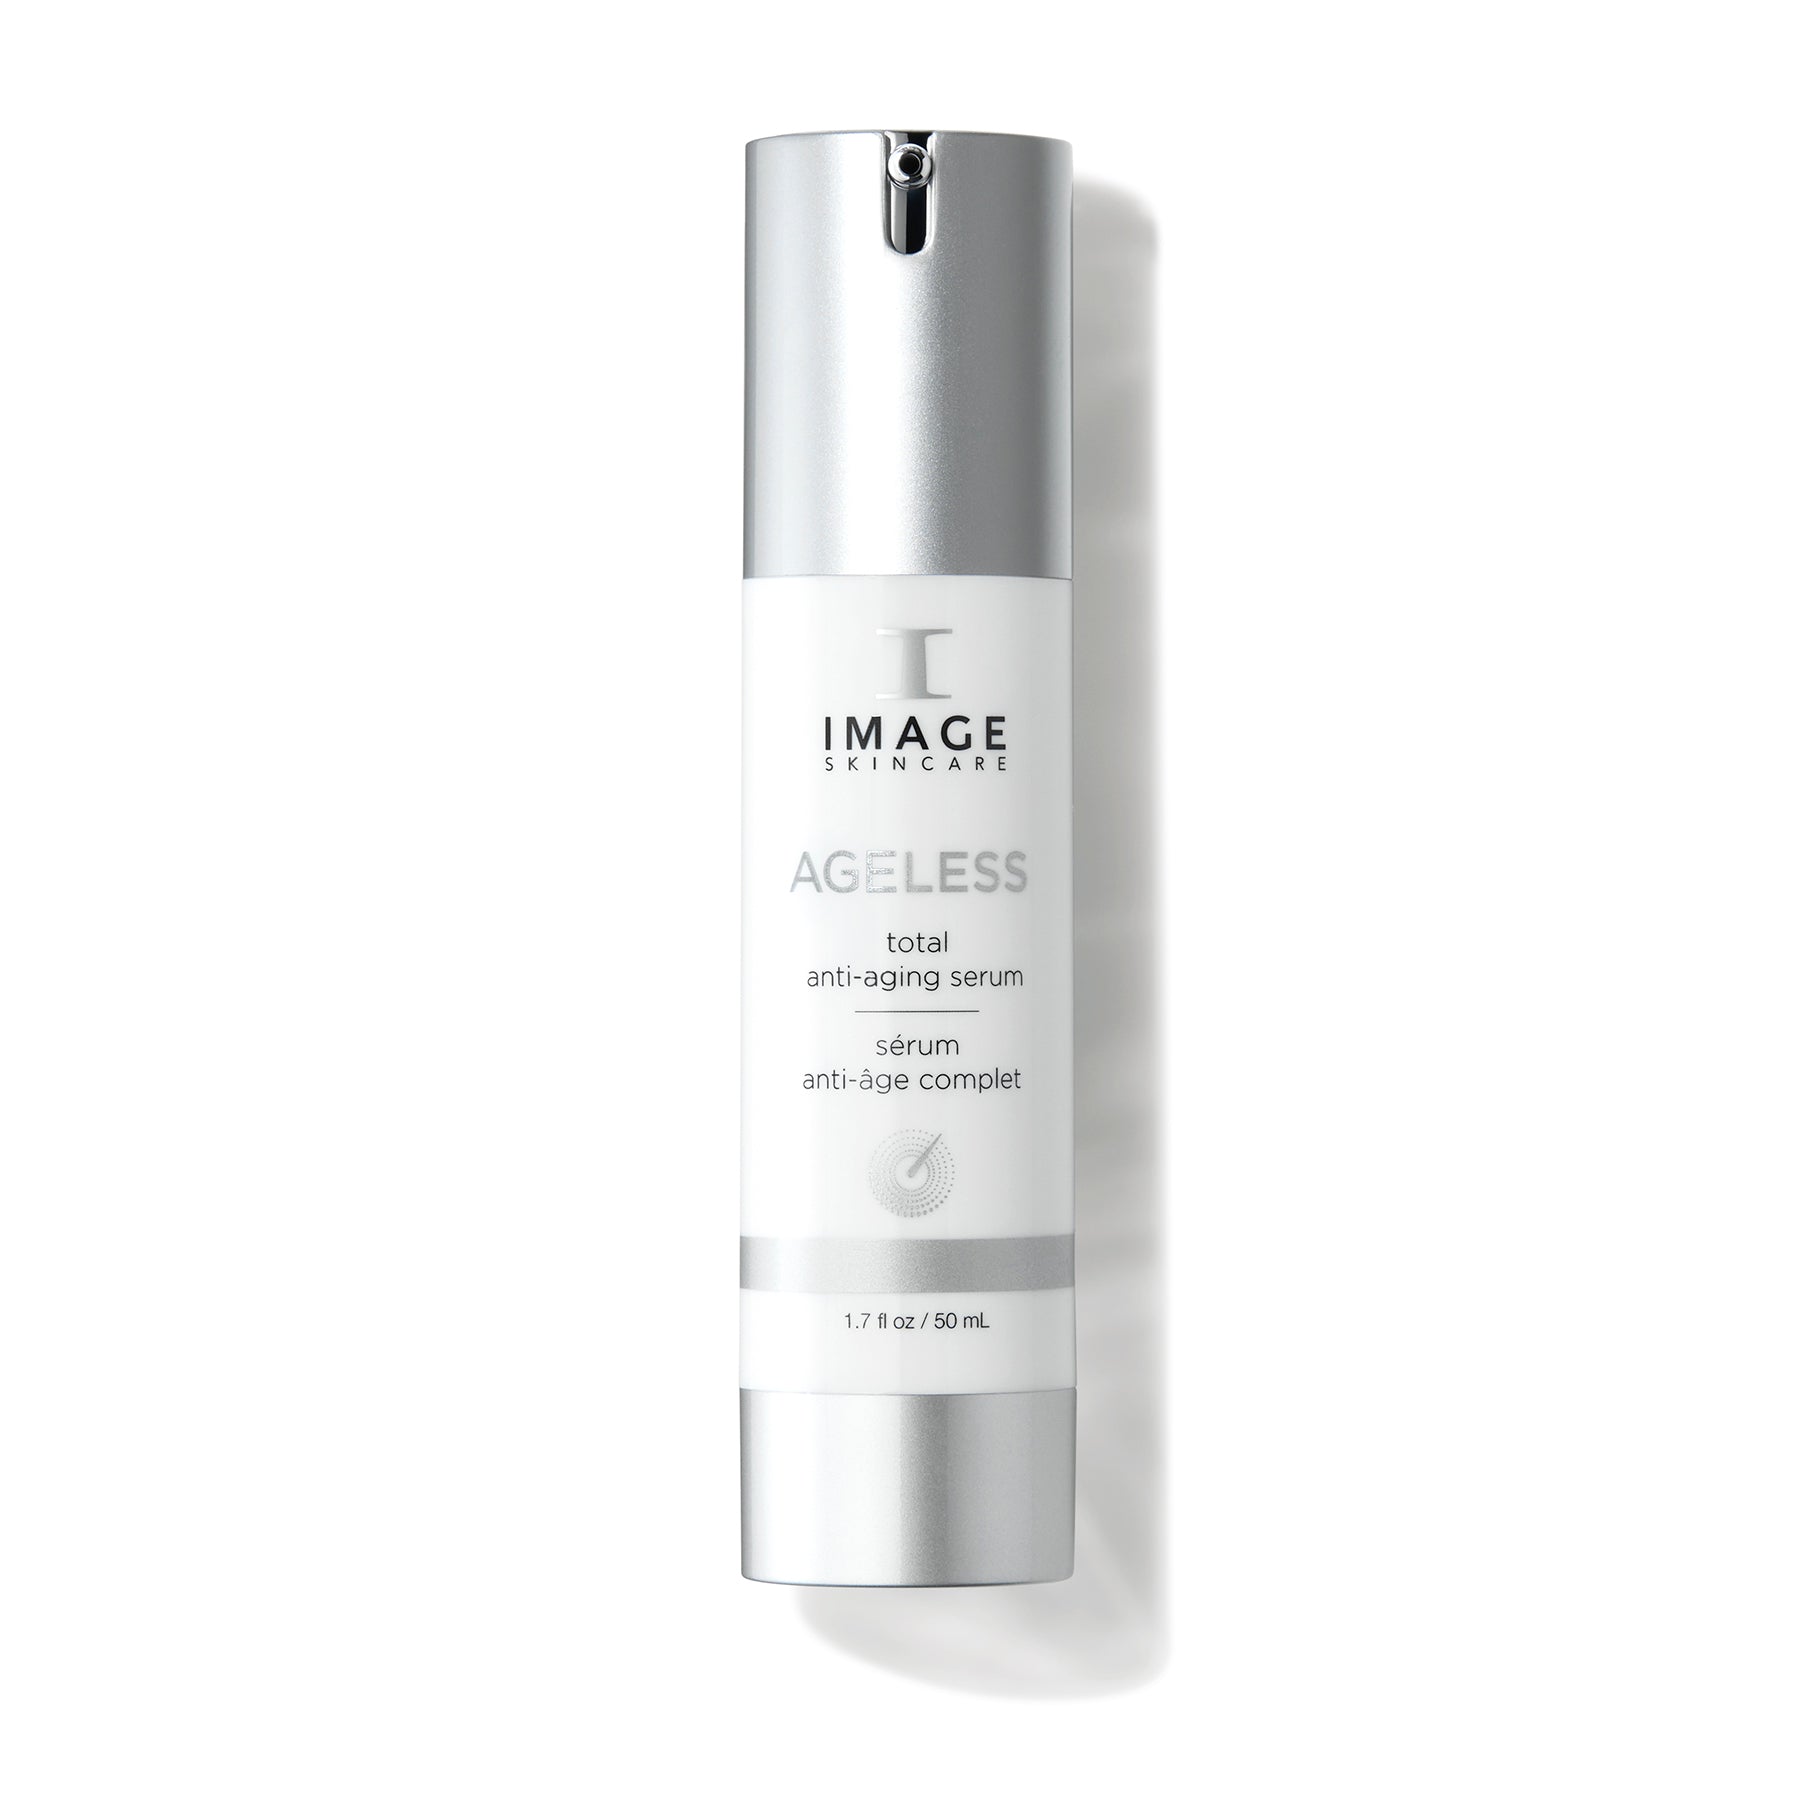 Image Skincare Ageless Total Anti Aging Serum Shop At Exclusive Beauty